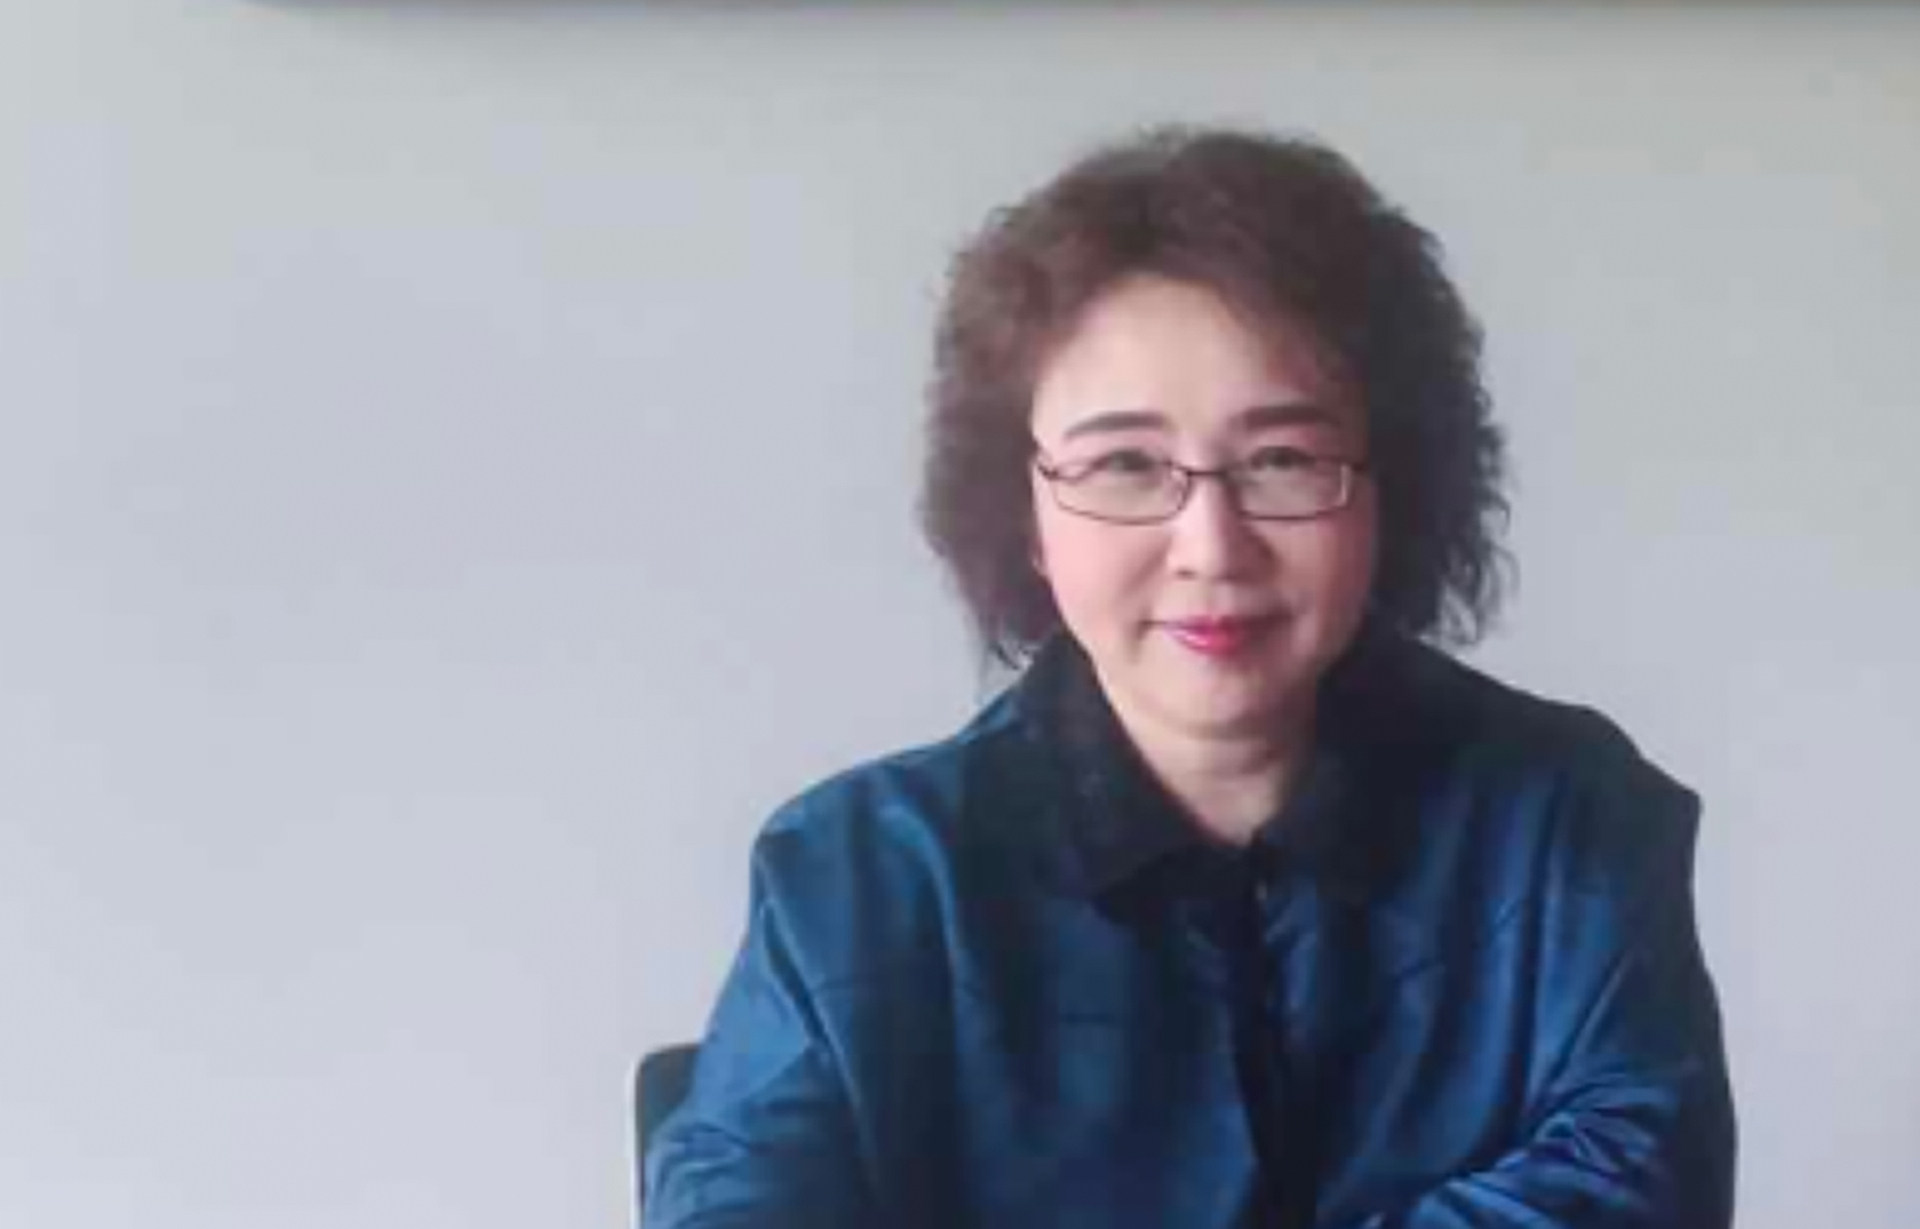 Trial continues in New Zealand over the murder of businesswoman Elizabeth Zhong. She was stabbed more than 20 times in her bedroom in Aukland in November 2020. Photo: New Zealand Police